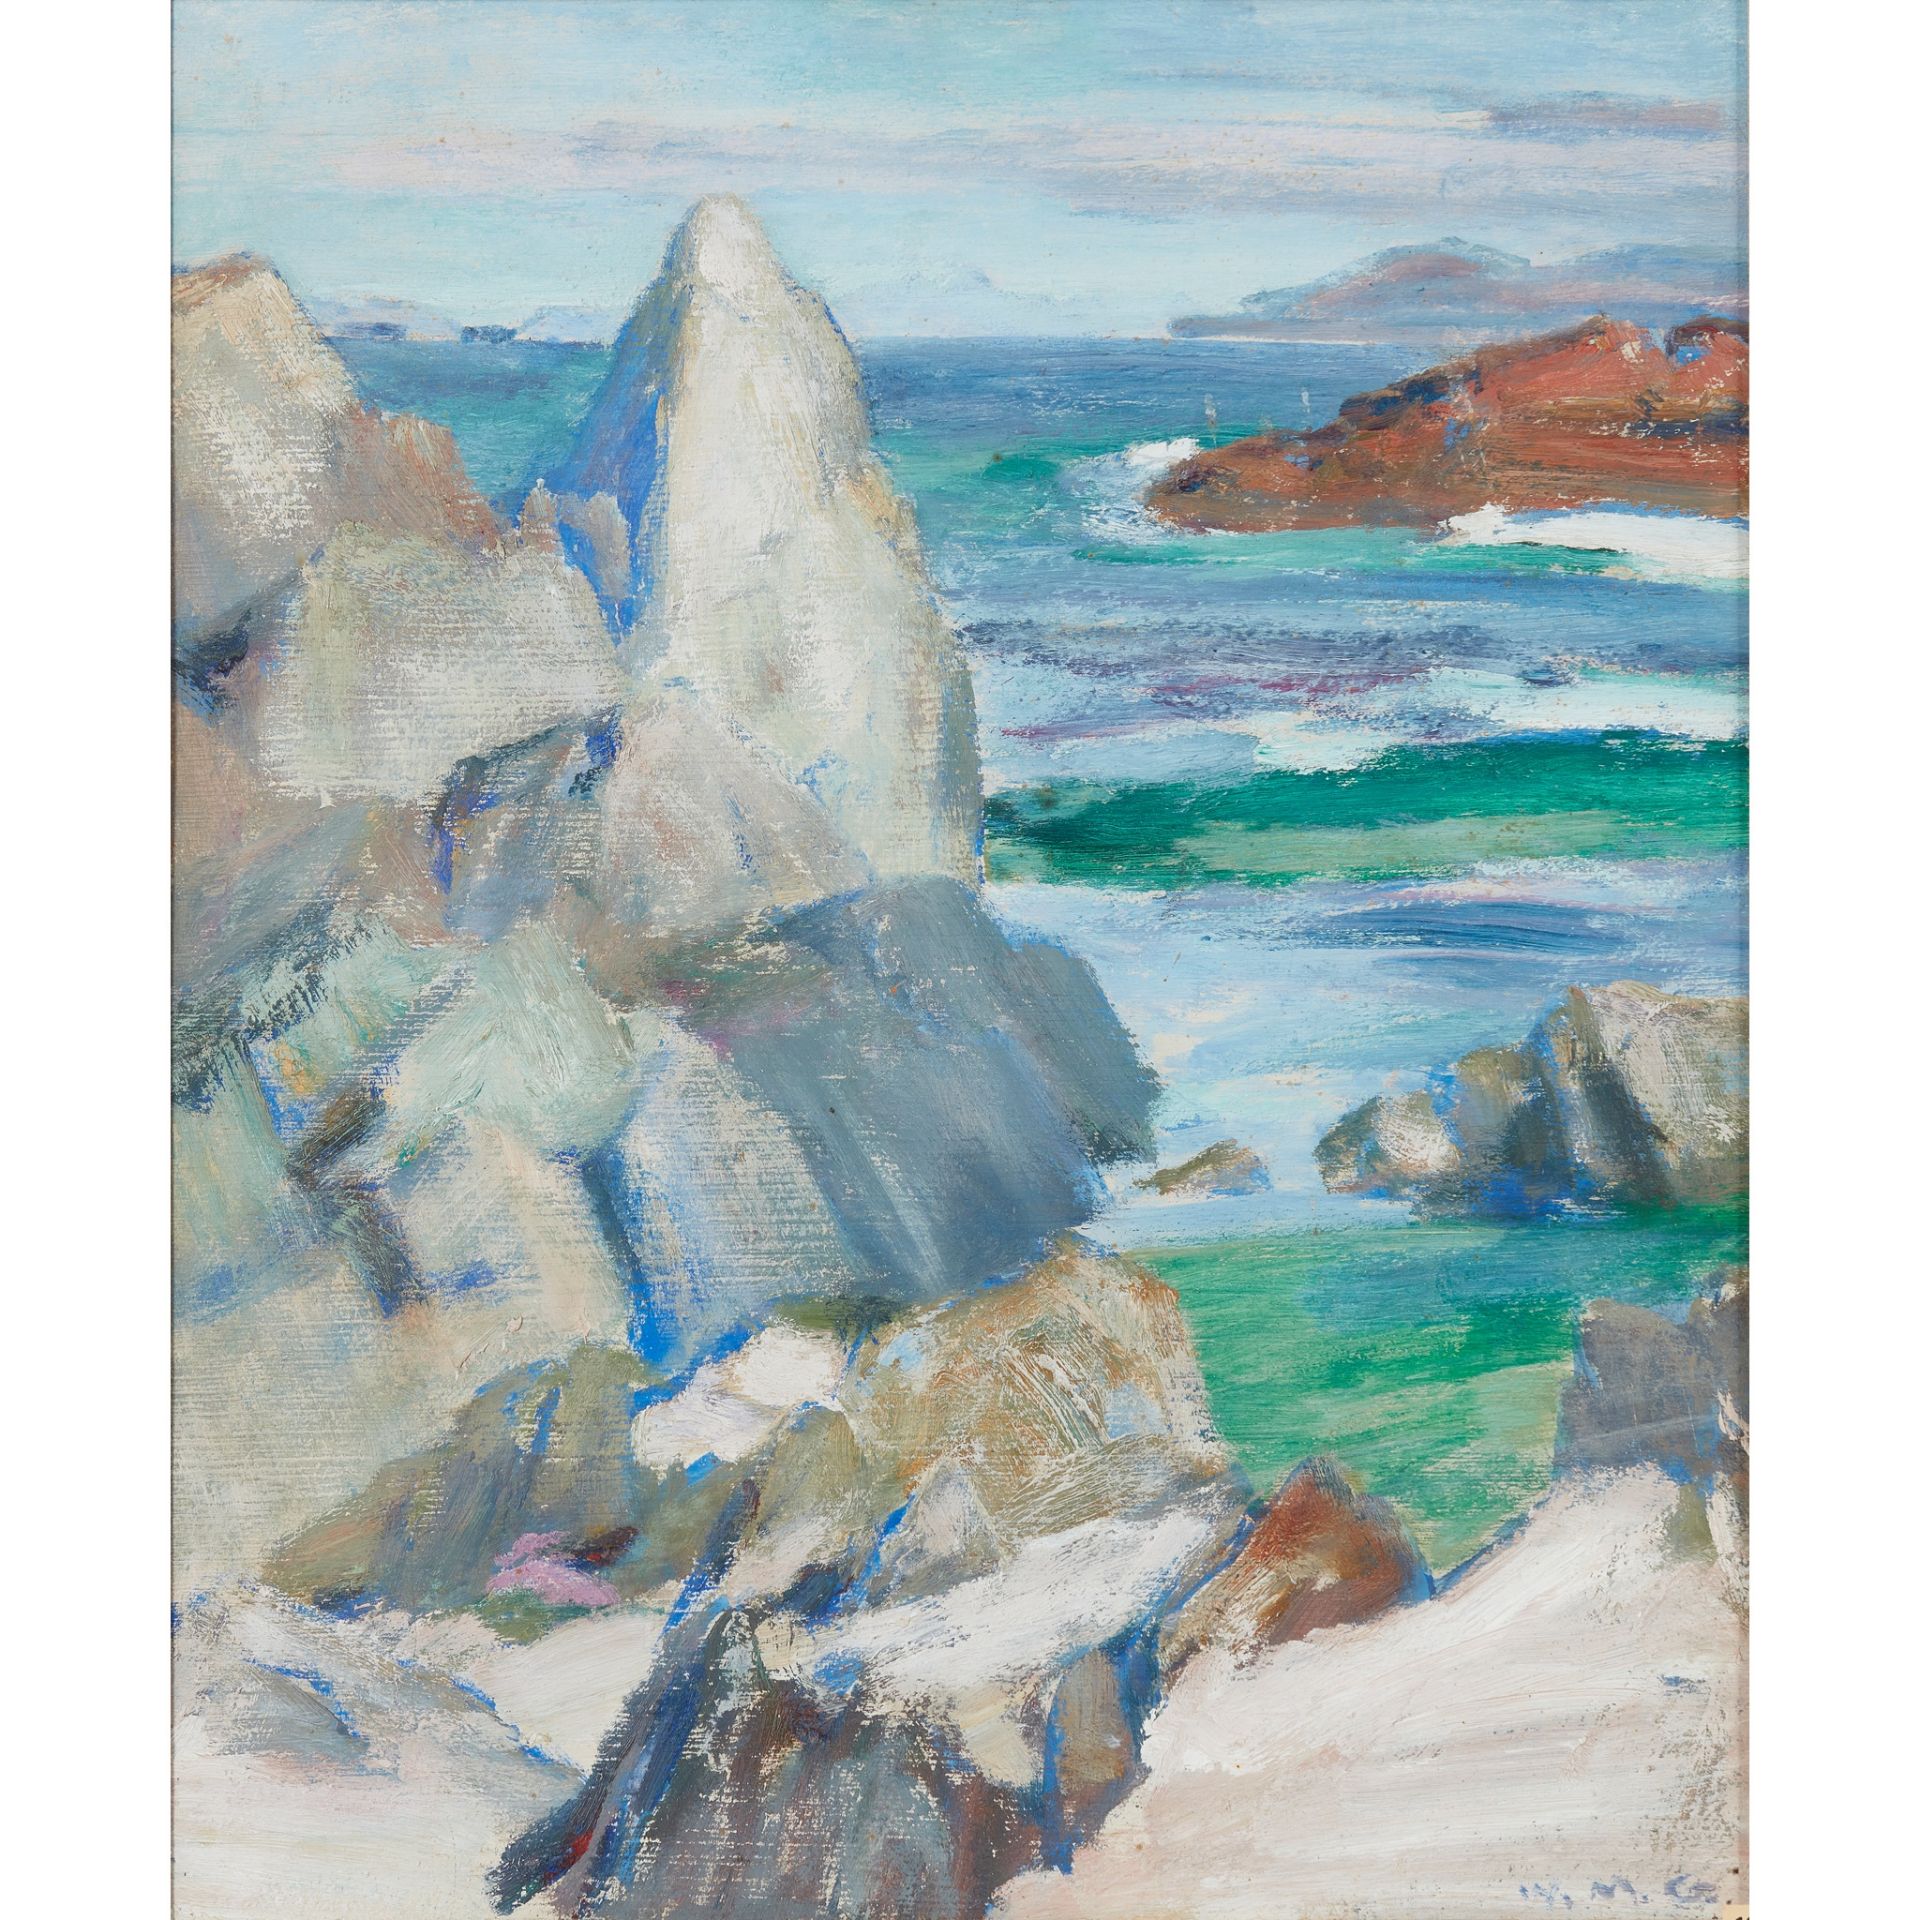 § WILLIAM MERVYN GLASS R.S.A.,P.S.S.A. (SCOTTISH 1885-1965) CATHEDRAL ROCK, IONA